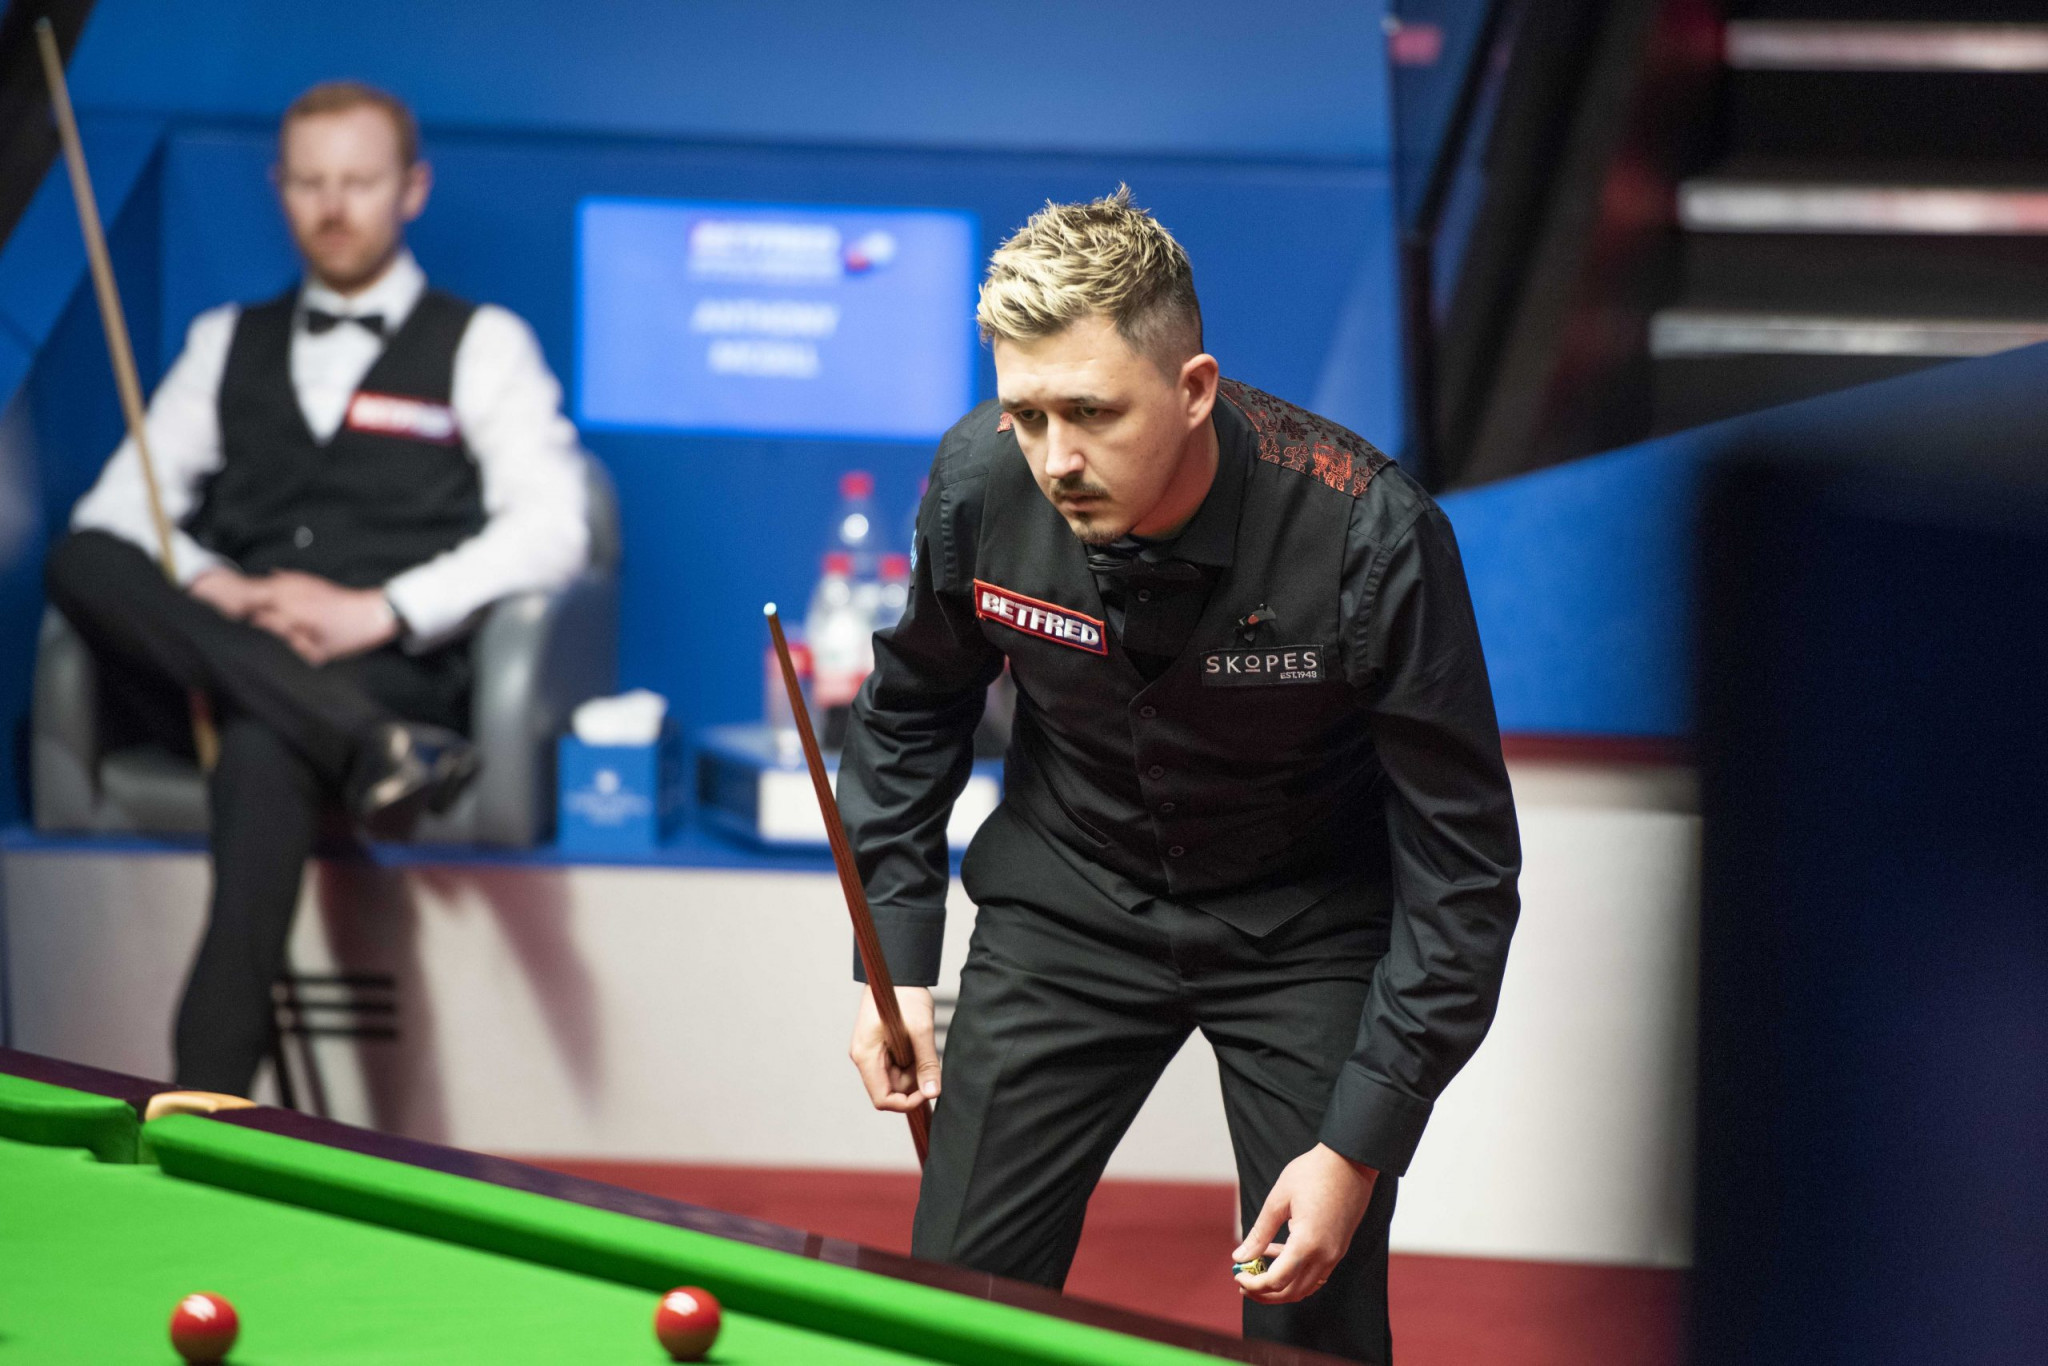 Spectators set to be allowed to watch final of World Snooker Championship